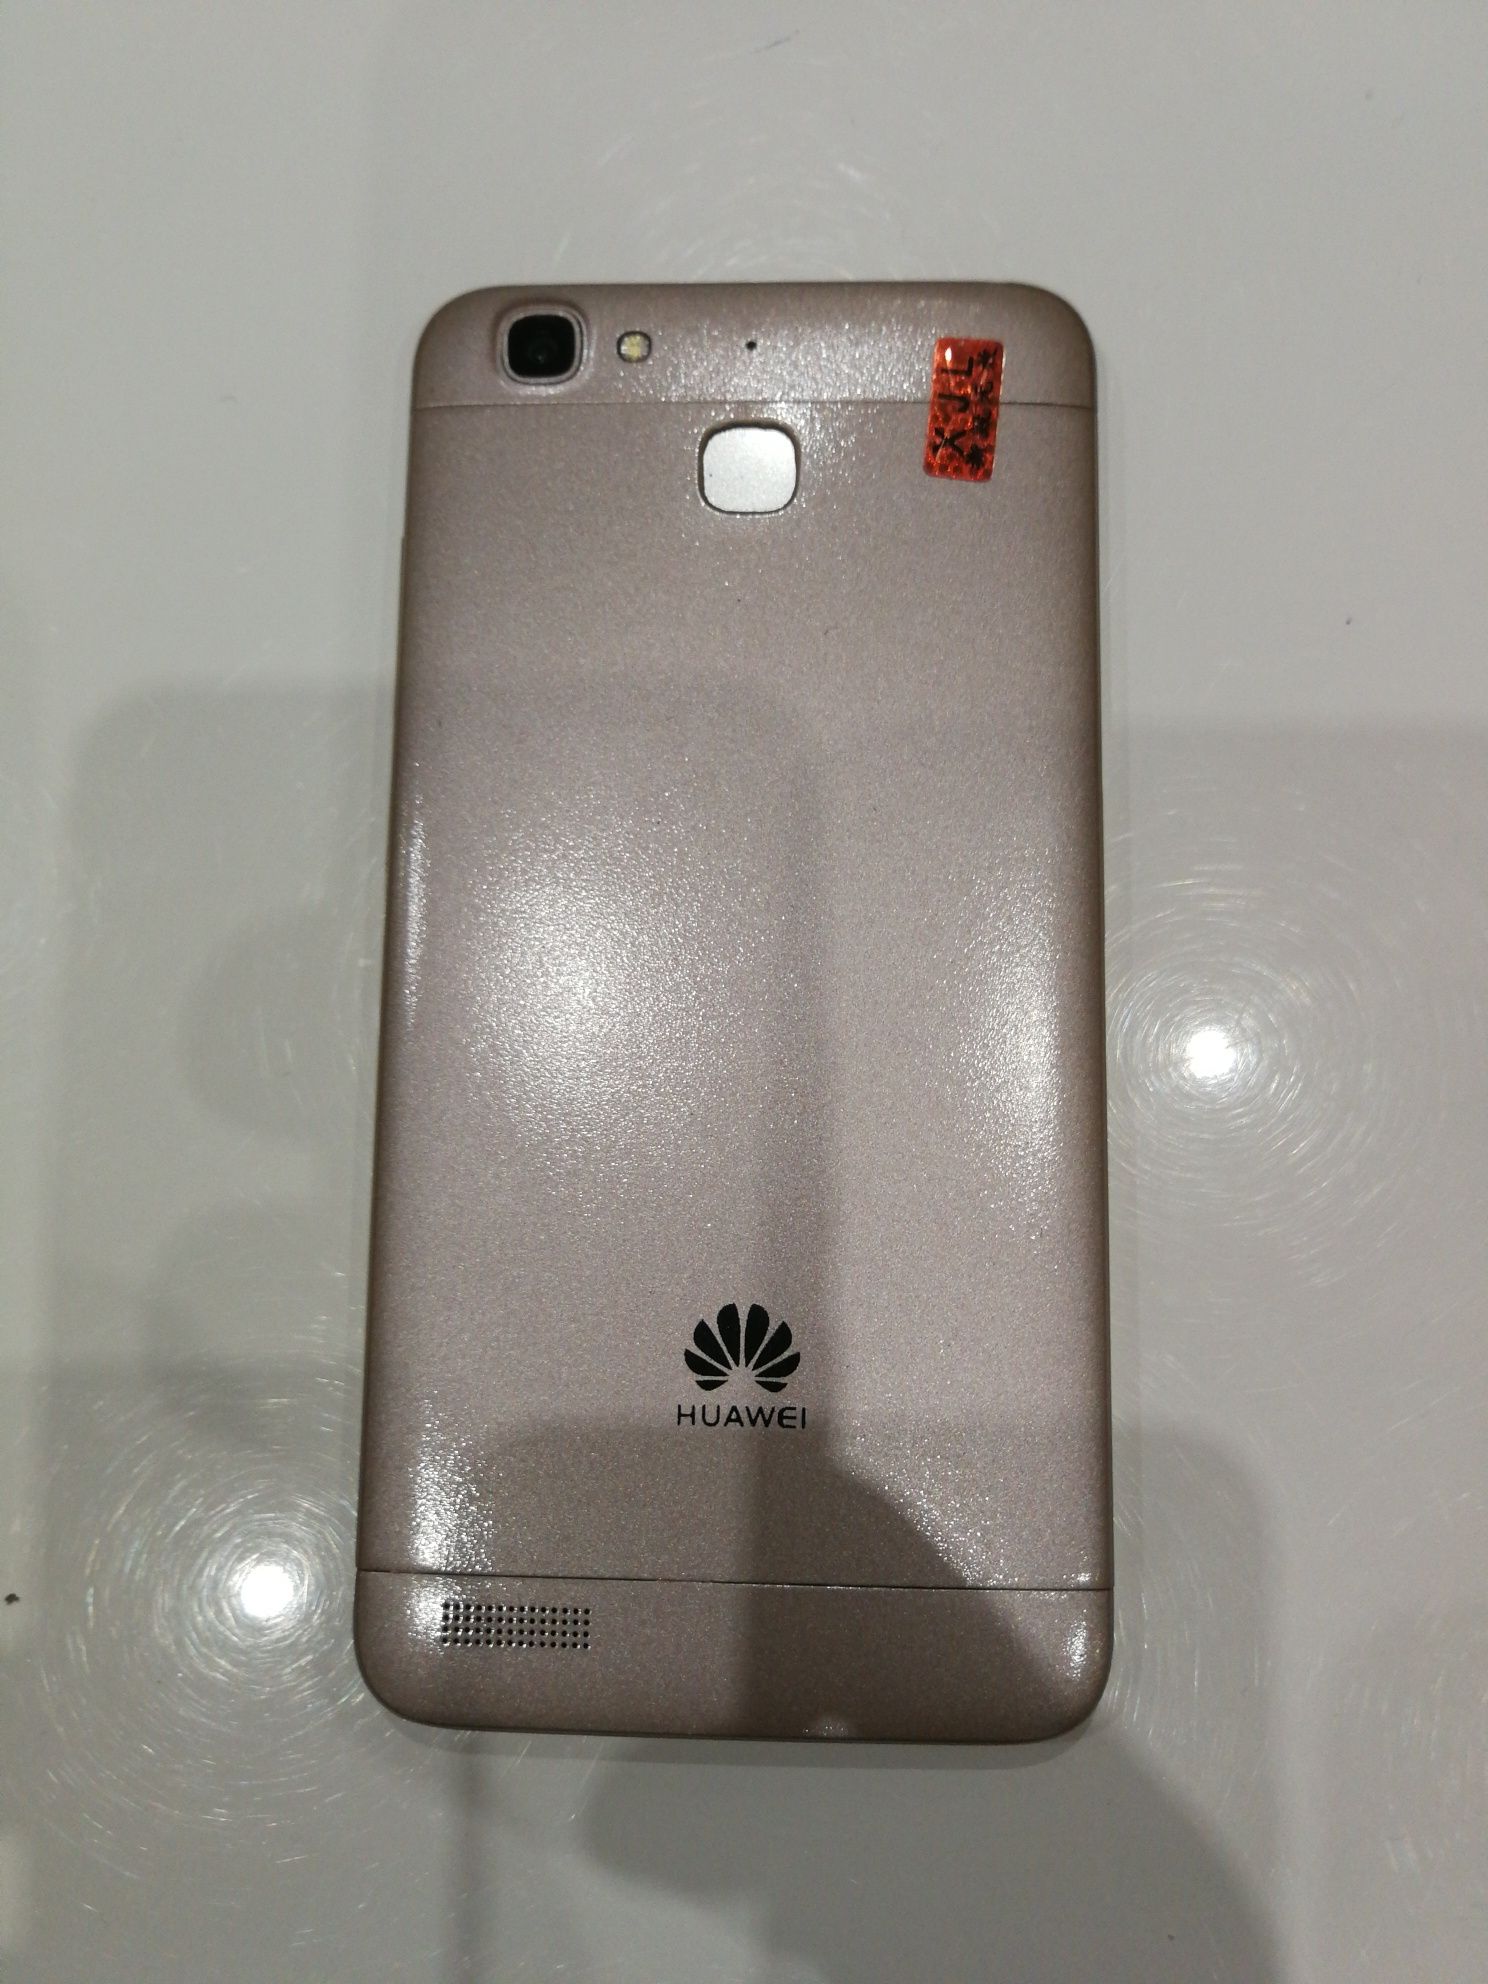 Huawei Enjoy 5s Android